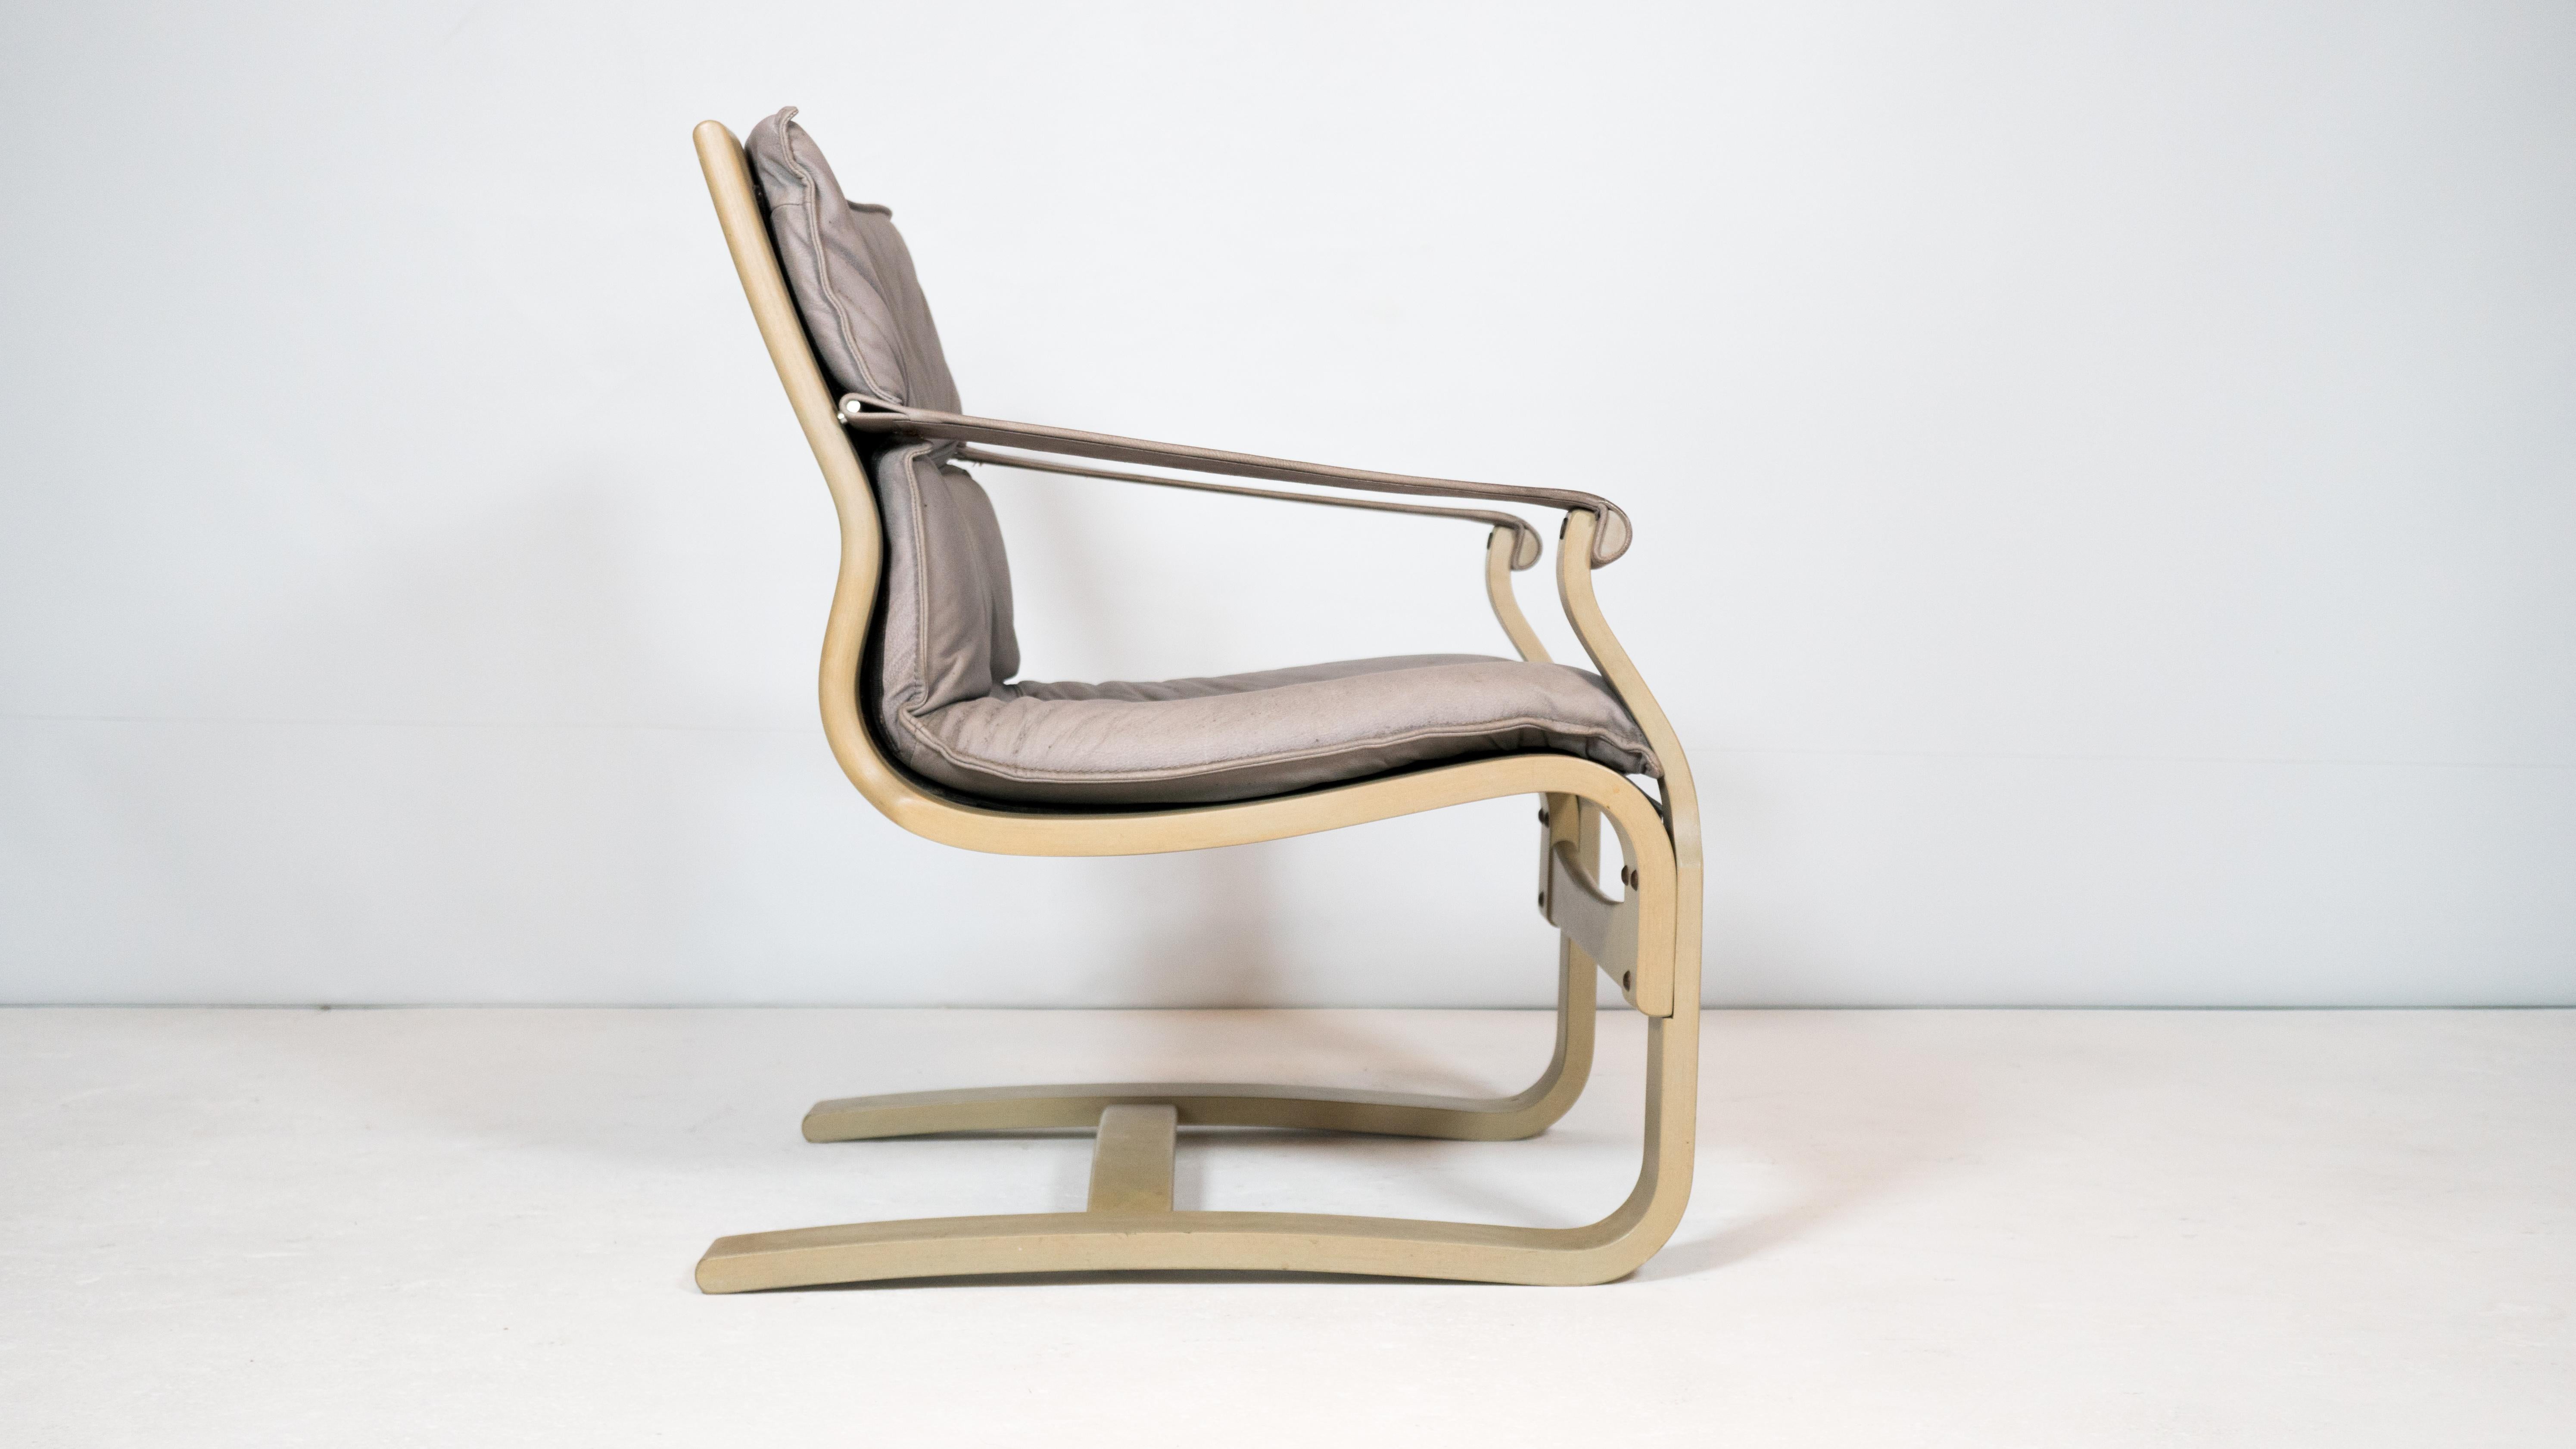 1970s Ake Fribytter Bentwood and Leather Lounge Chair for Nelo For Sale 2